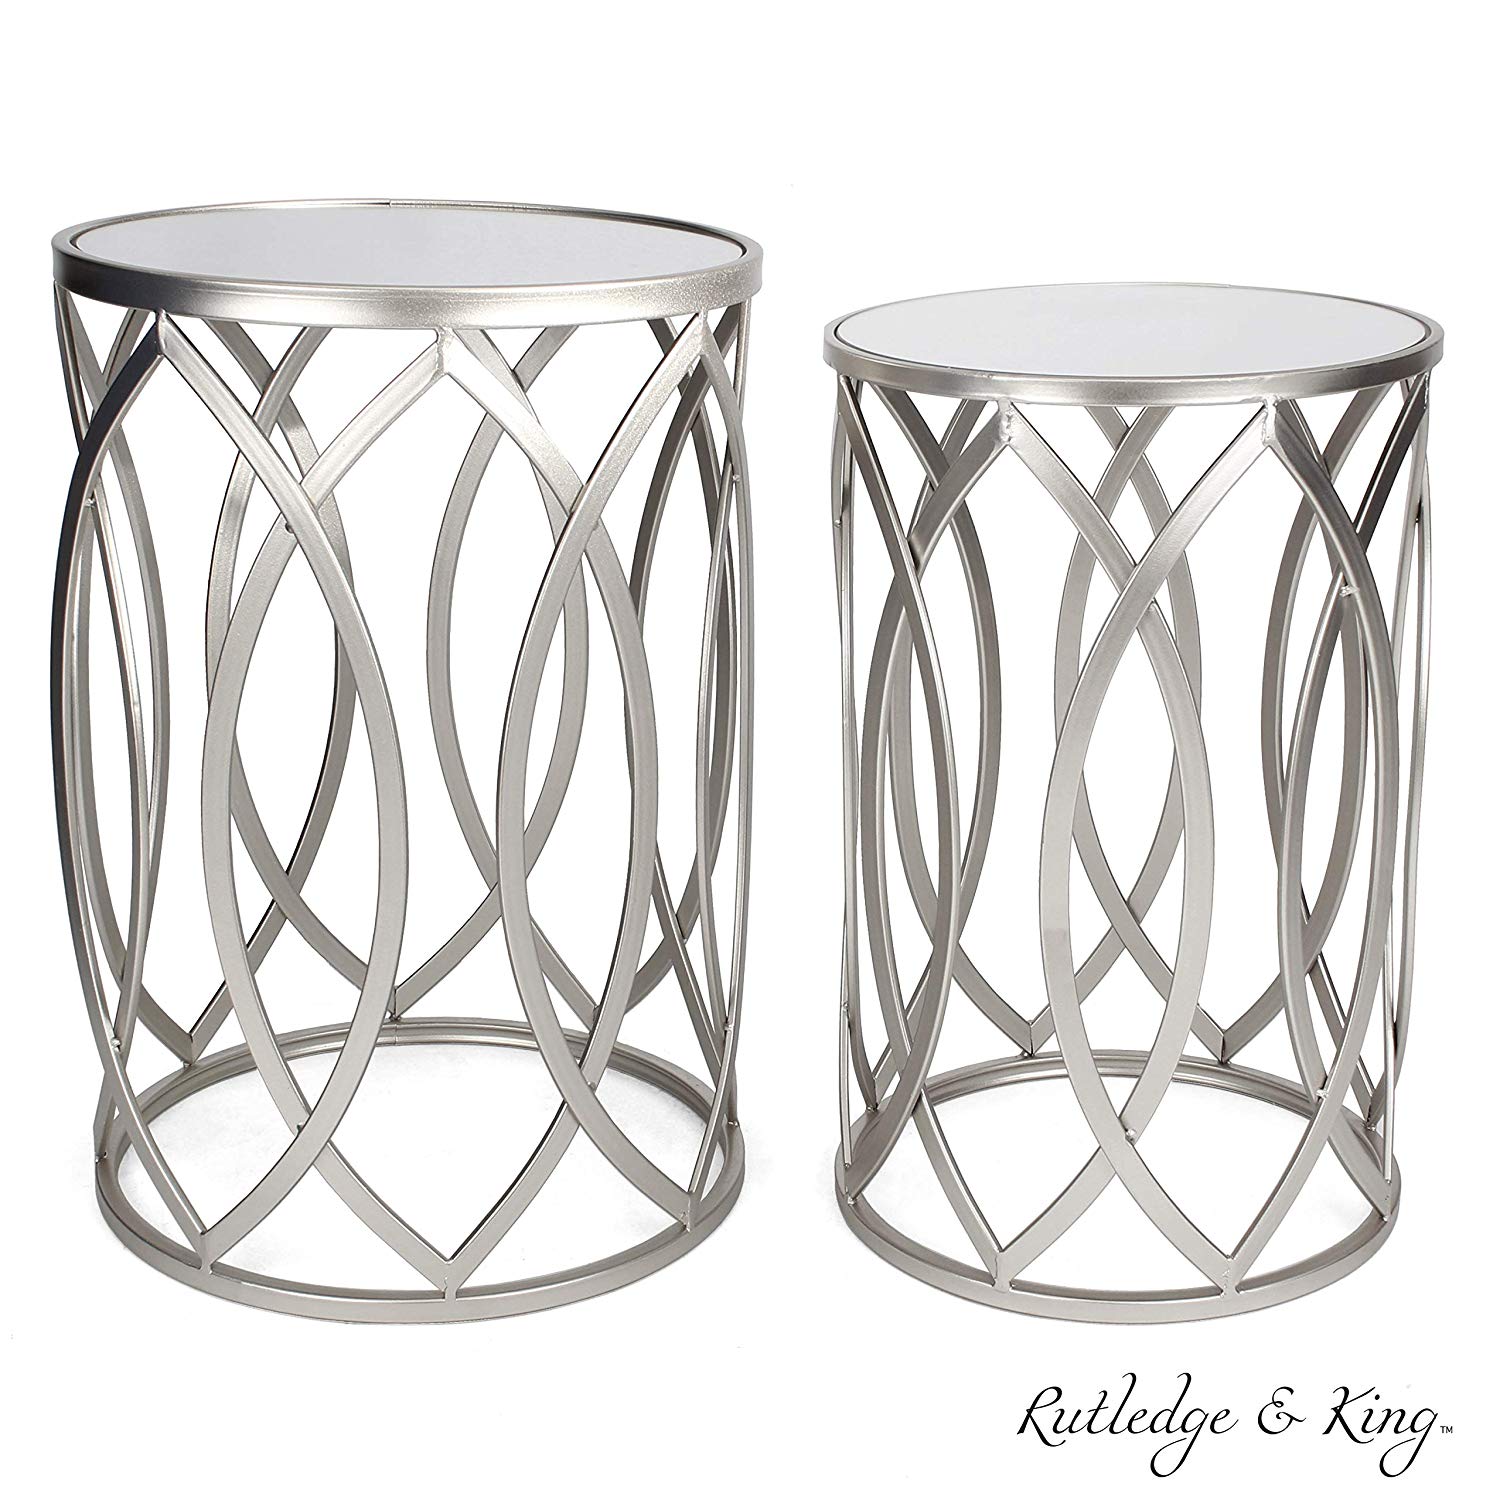 round end table set silver tables with mirrored solar metal accent tops nesting and side rutledge king blufton indoor mat lamp shades for wall lights glass agate wooden legs